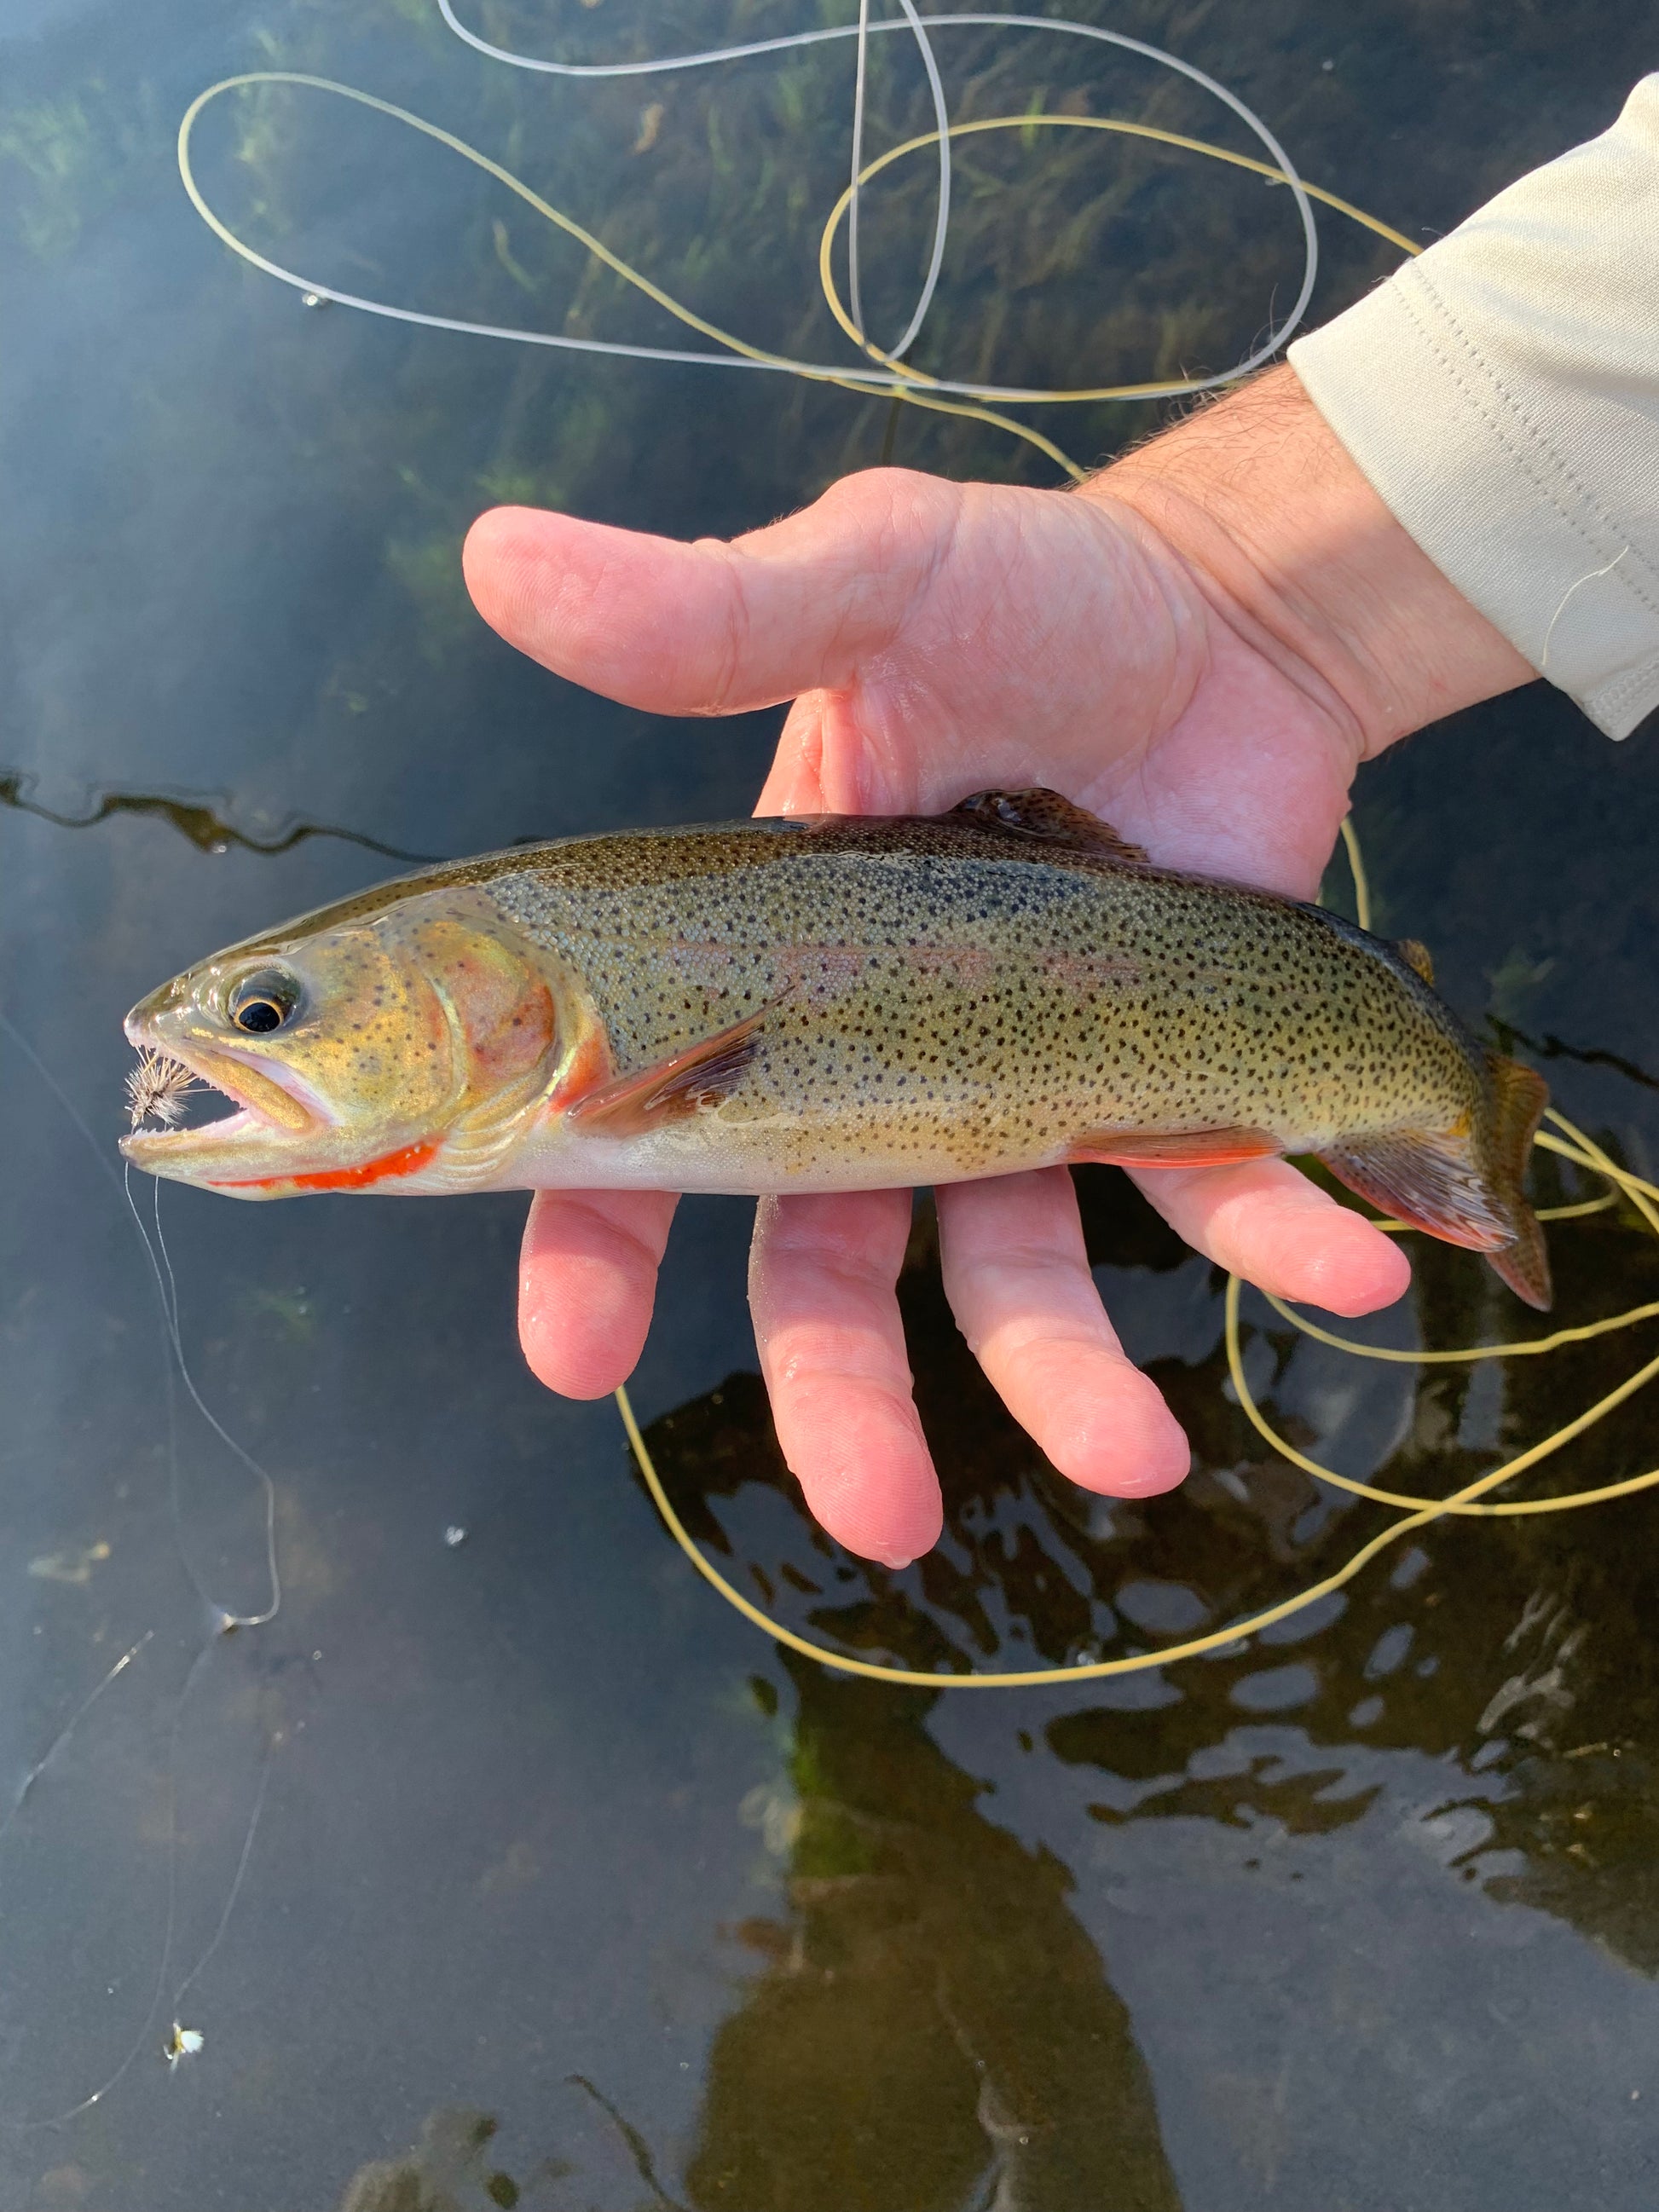 Cutthroat Trout caught with a Caddis